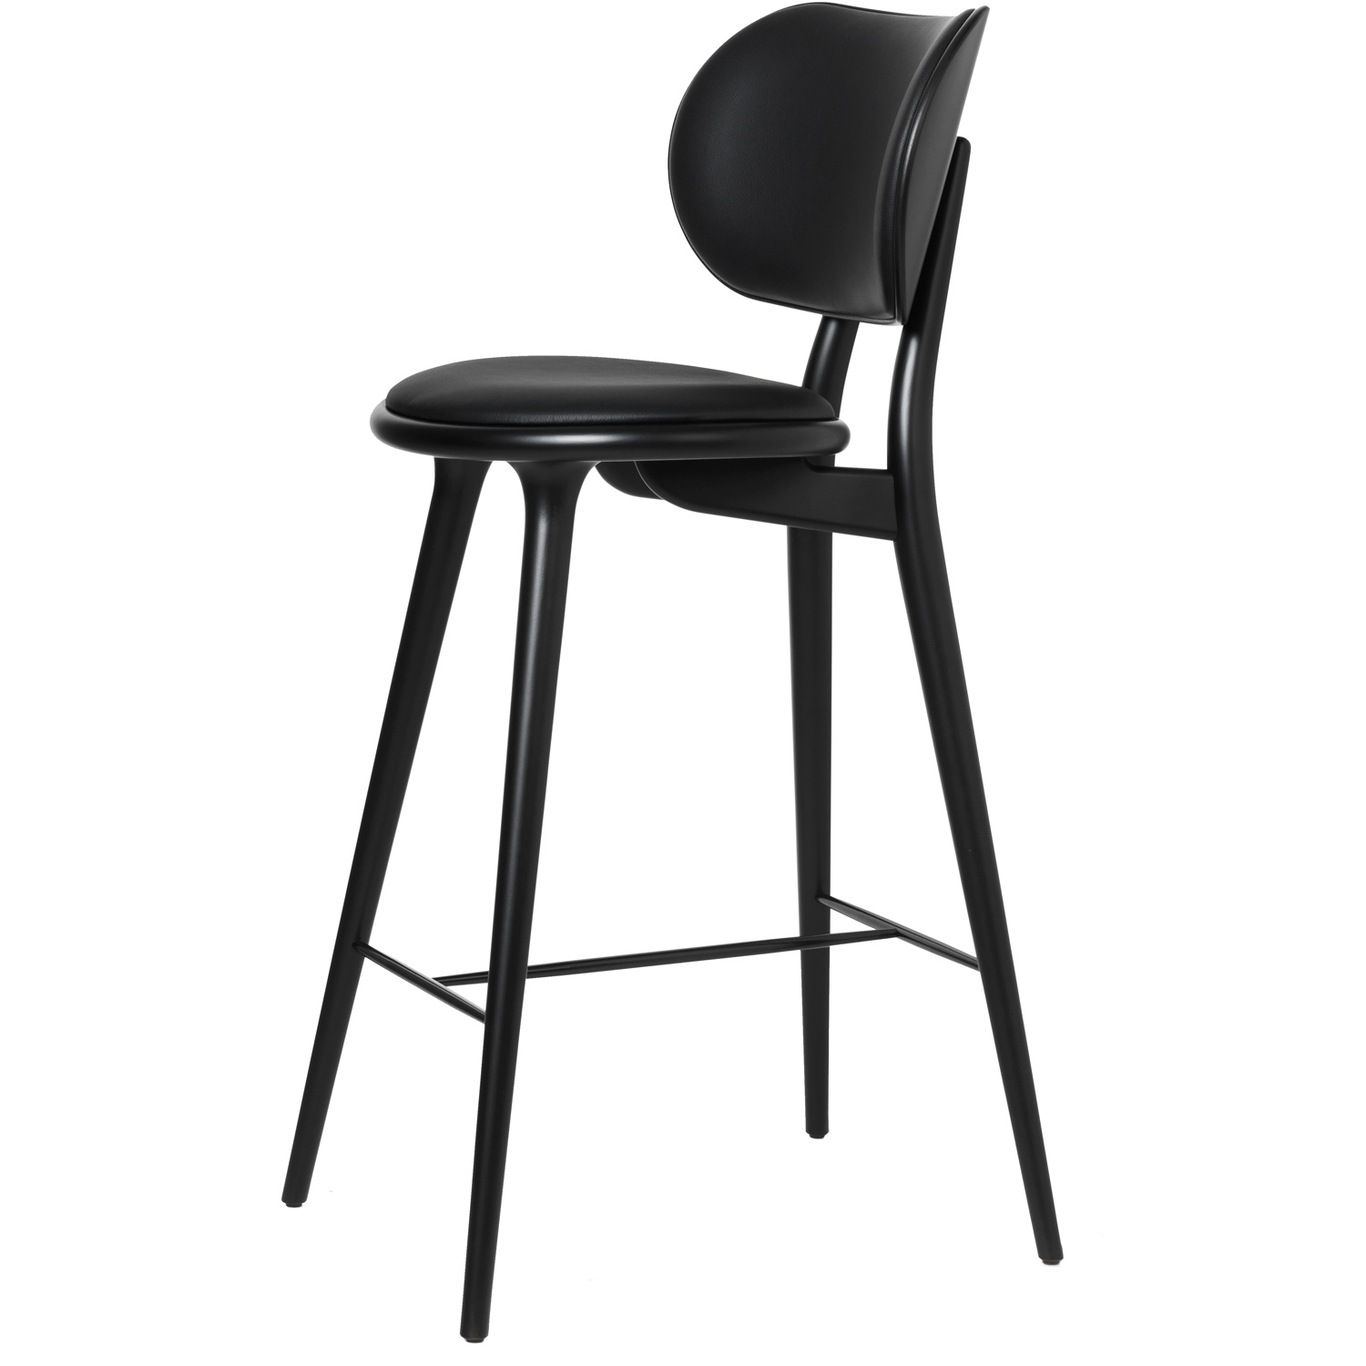 The High Stool Backrest, Black Lacquered Beech